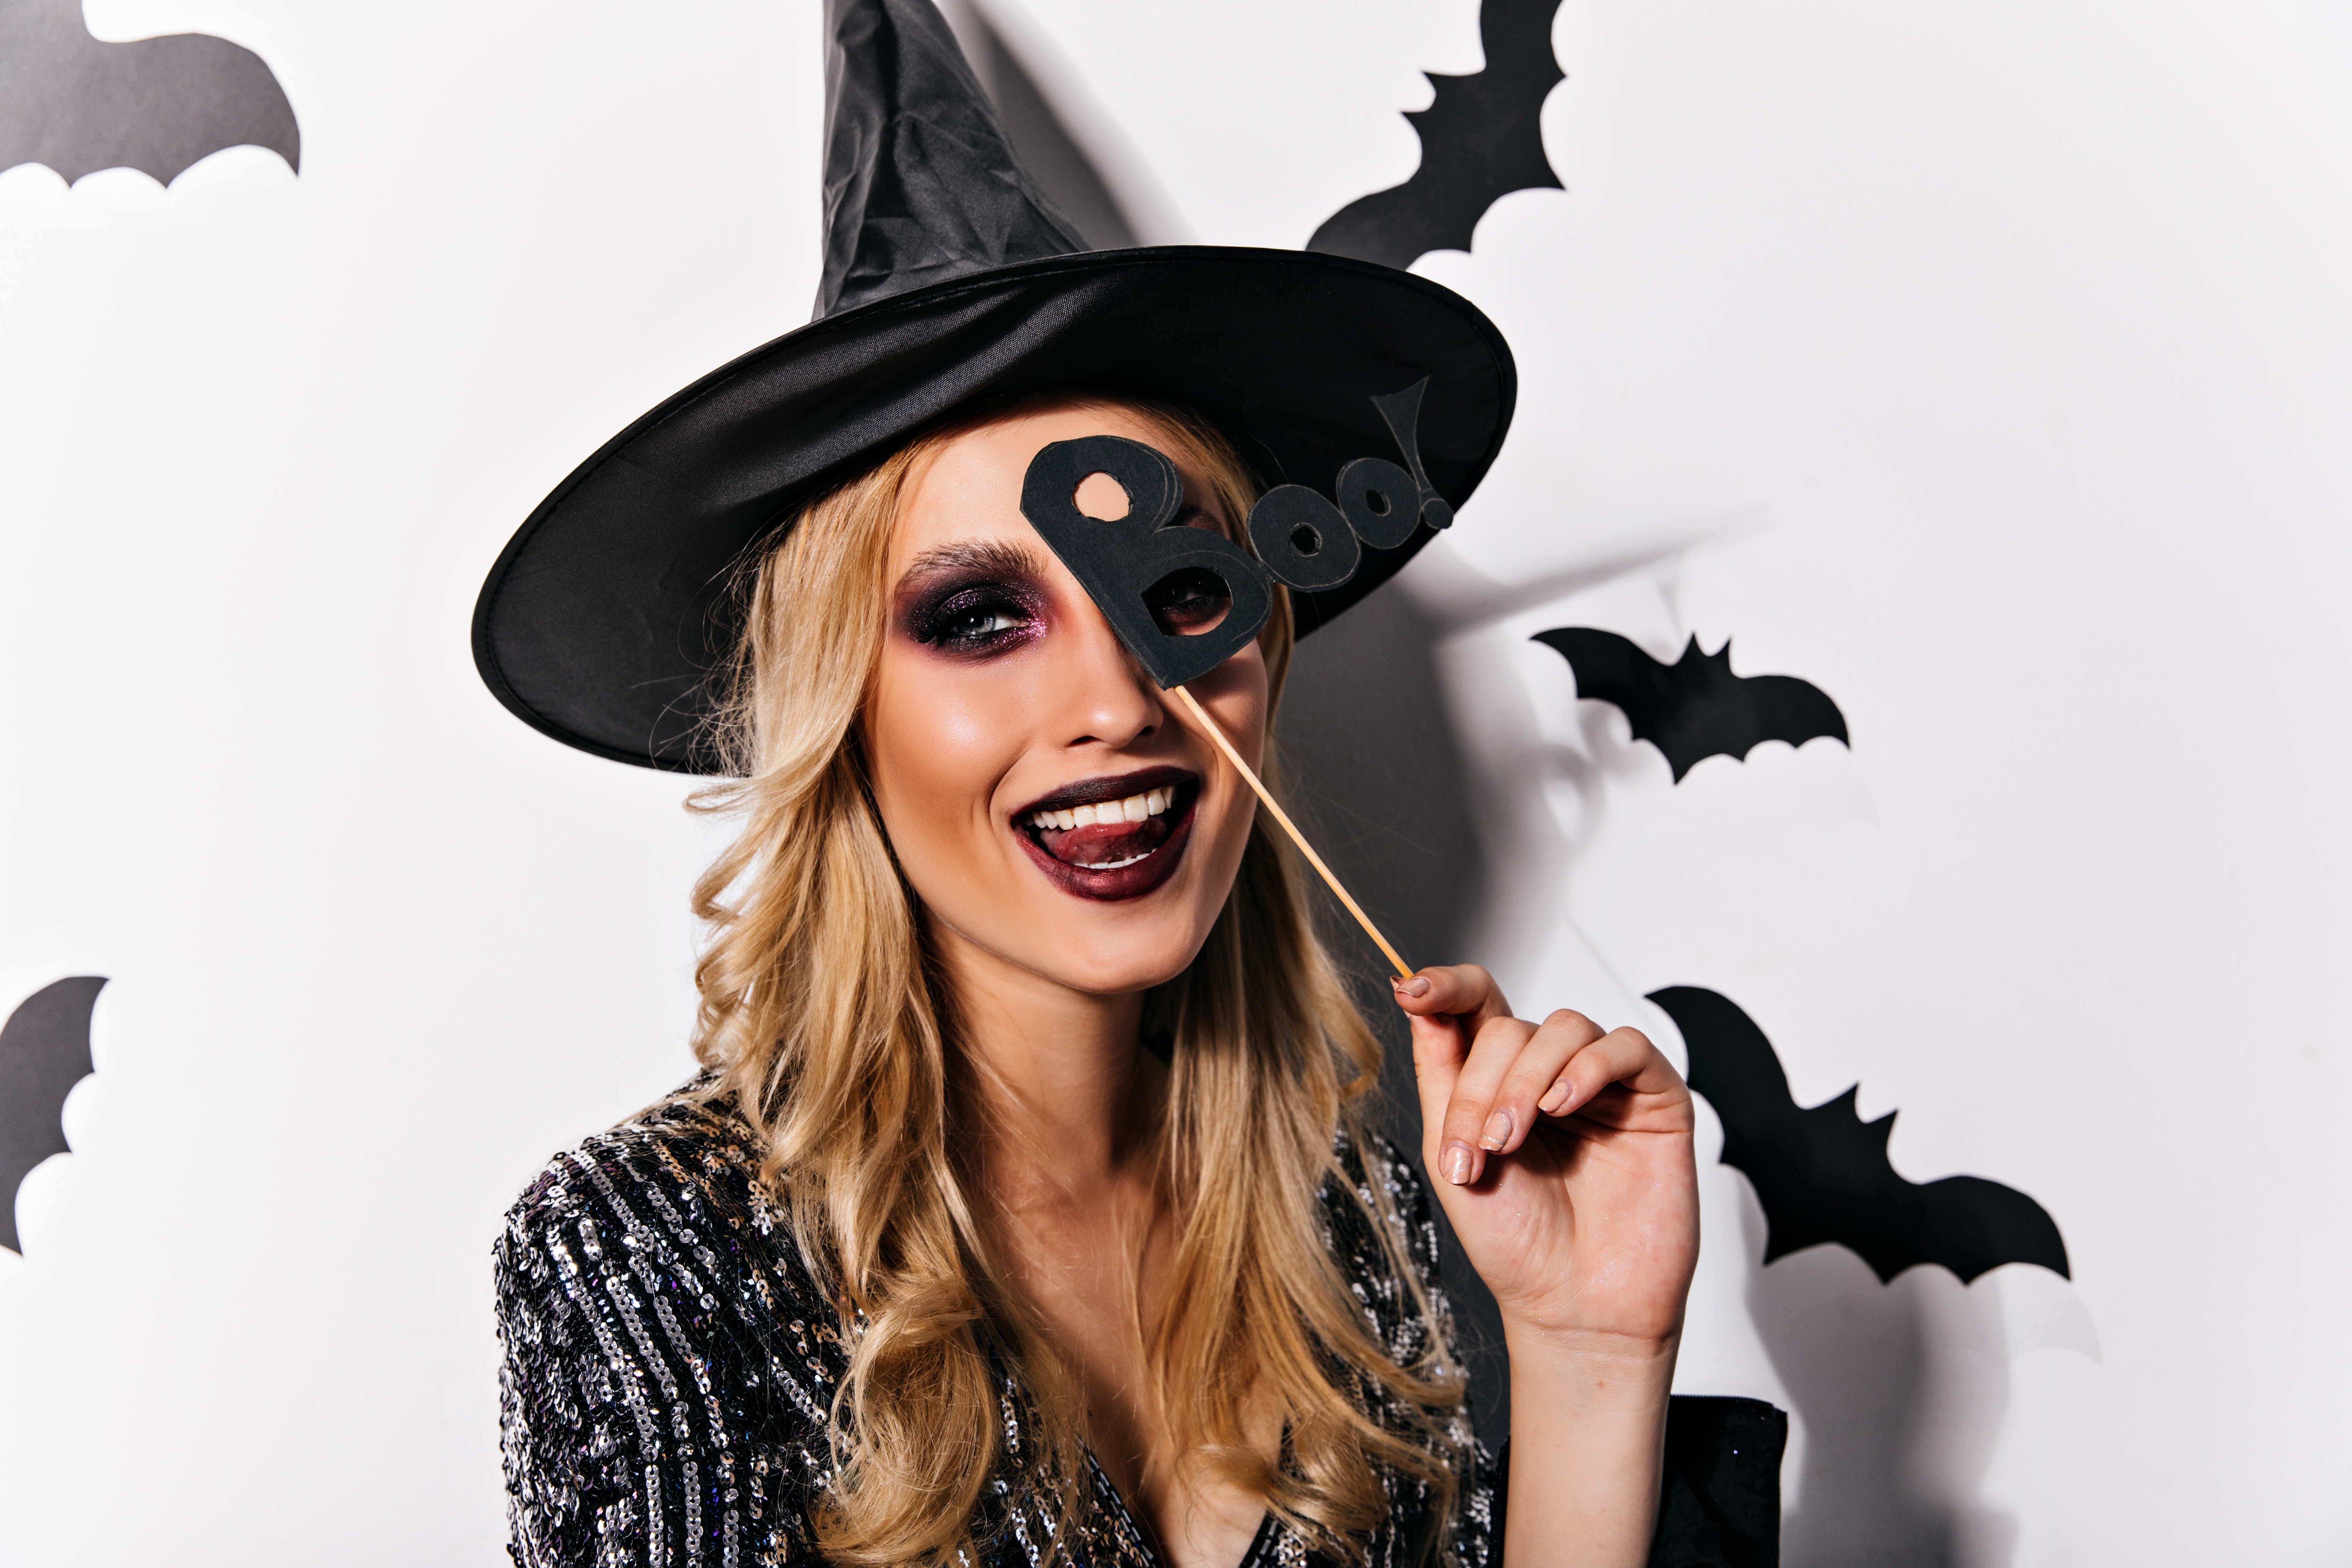 Heading Out For Halloween? Here&#8217;s Some Spooky Makeup Inspo To Set The Villanous Vibe